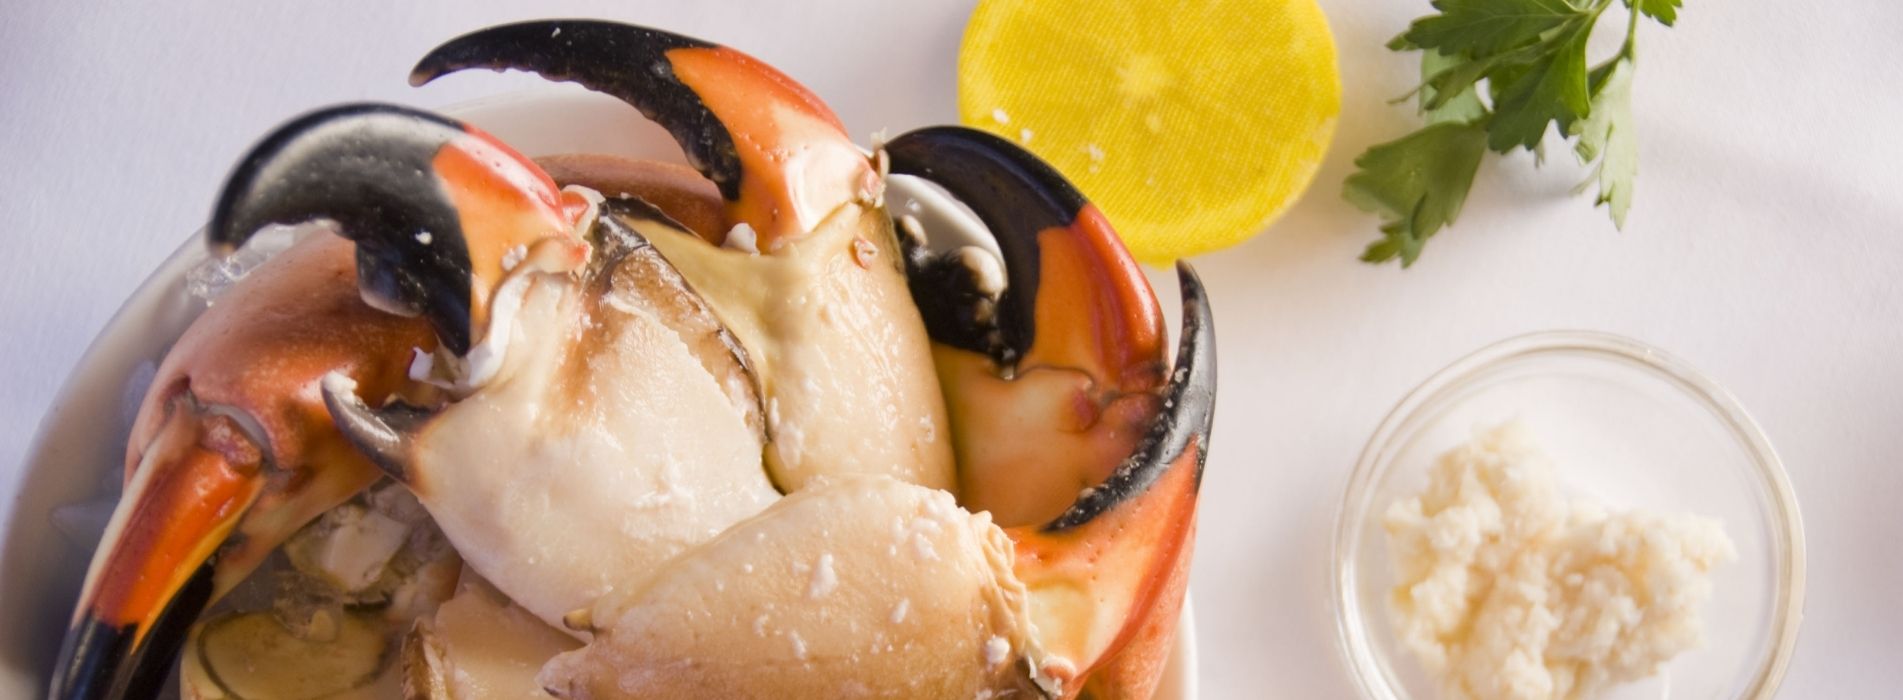 How To Tell if Your Stone Crabs Are Fresh or Frozen